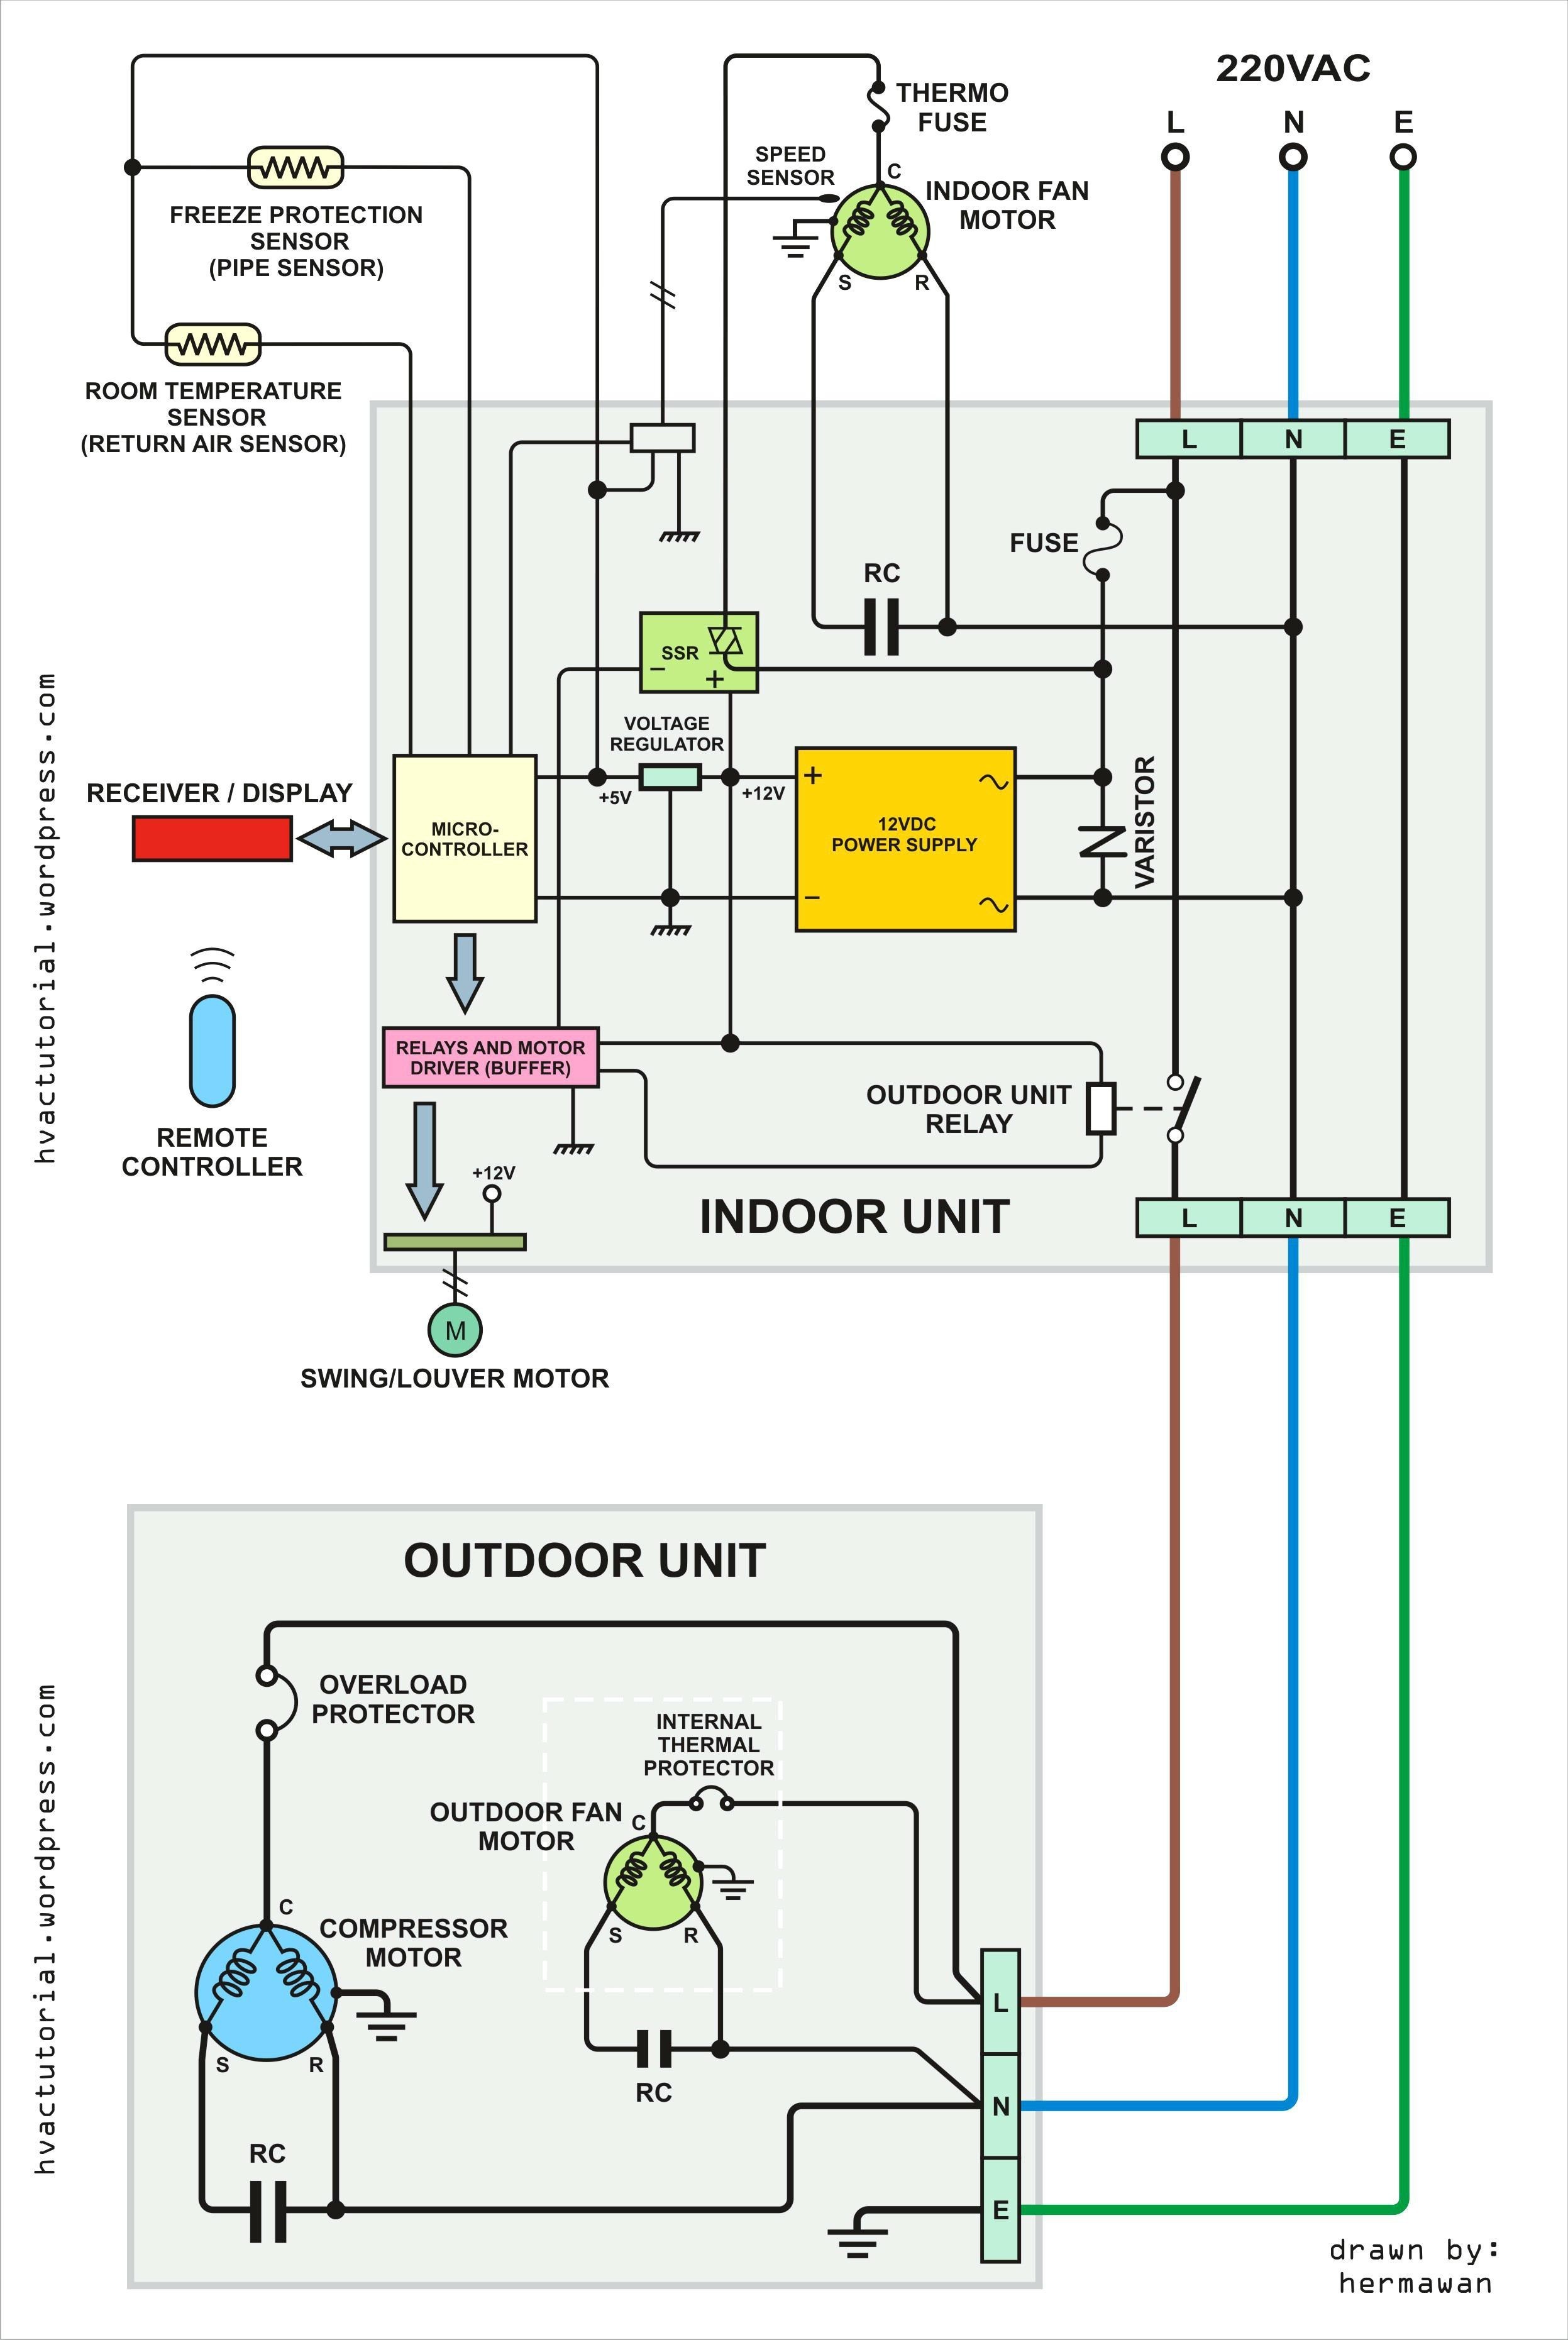 Wiring Diagram For Lennox Gas Furnace Valid Gas Furnace Thermocouple Wiring Diagram Inspirationa Famous Lennox